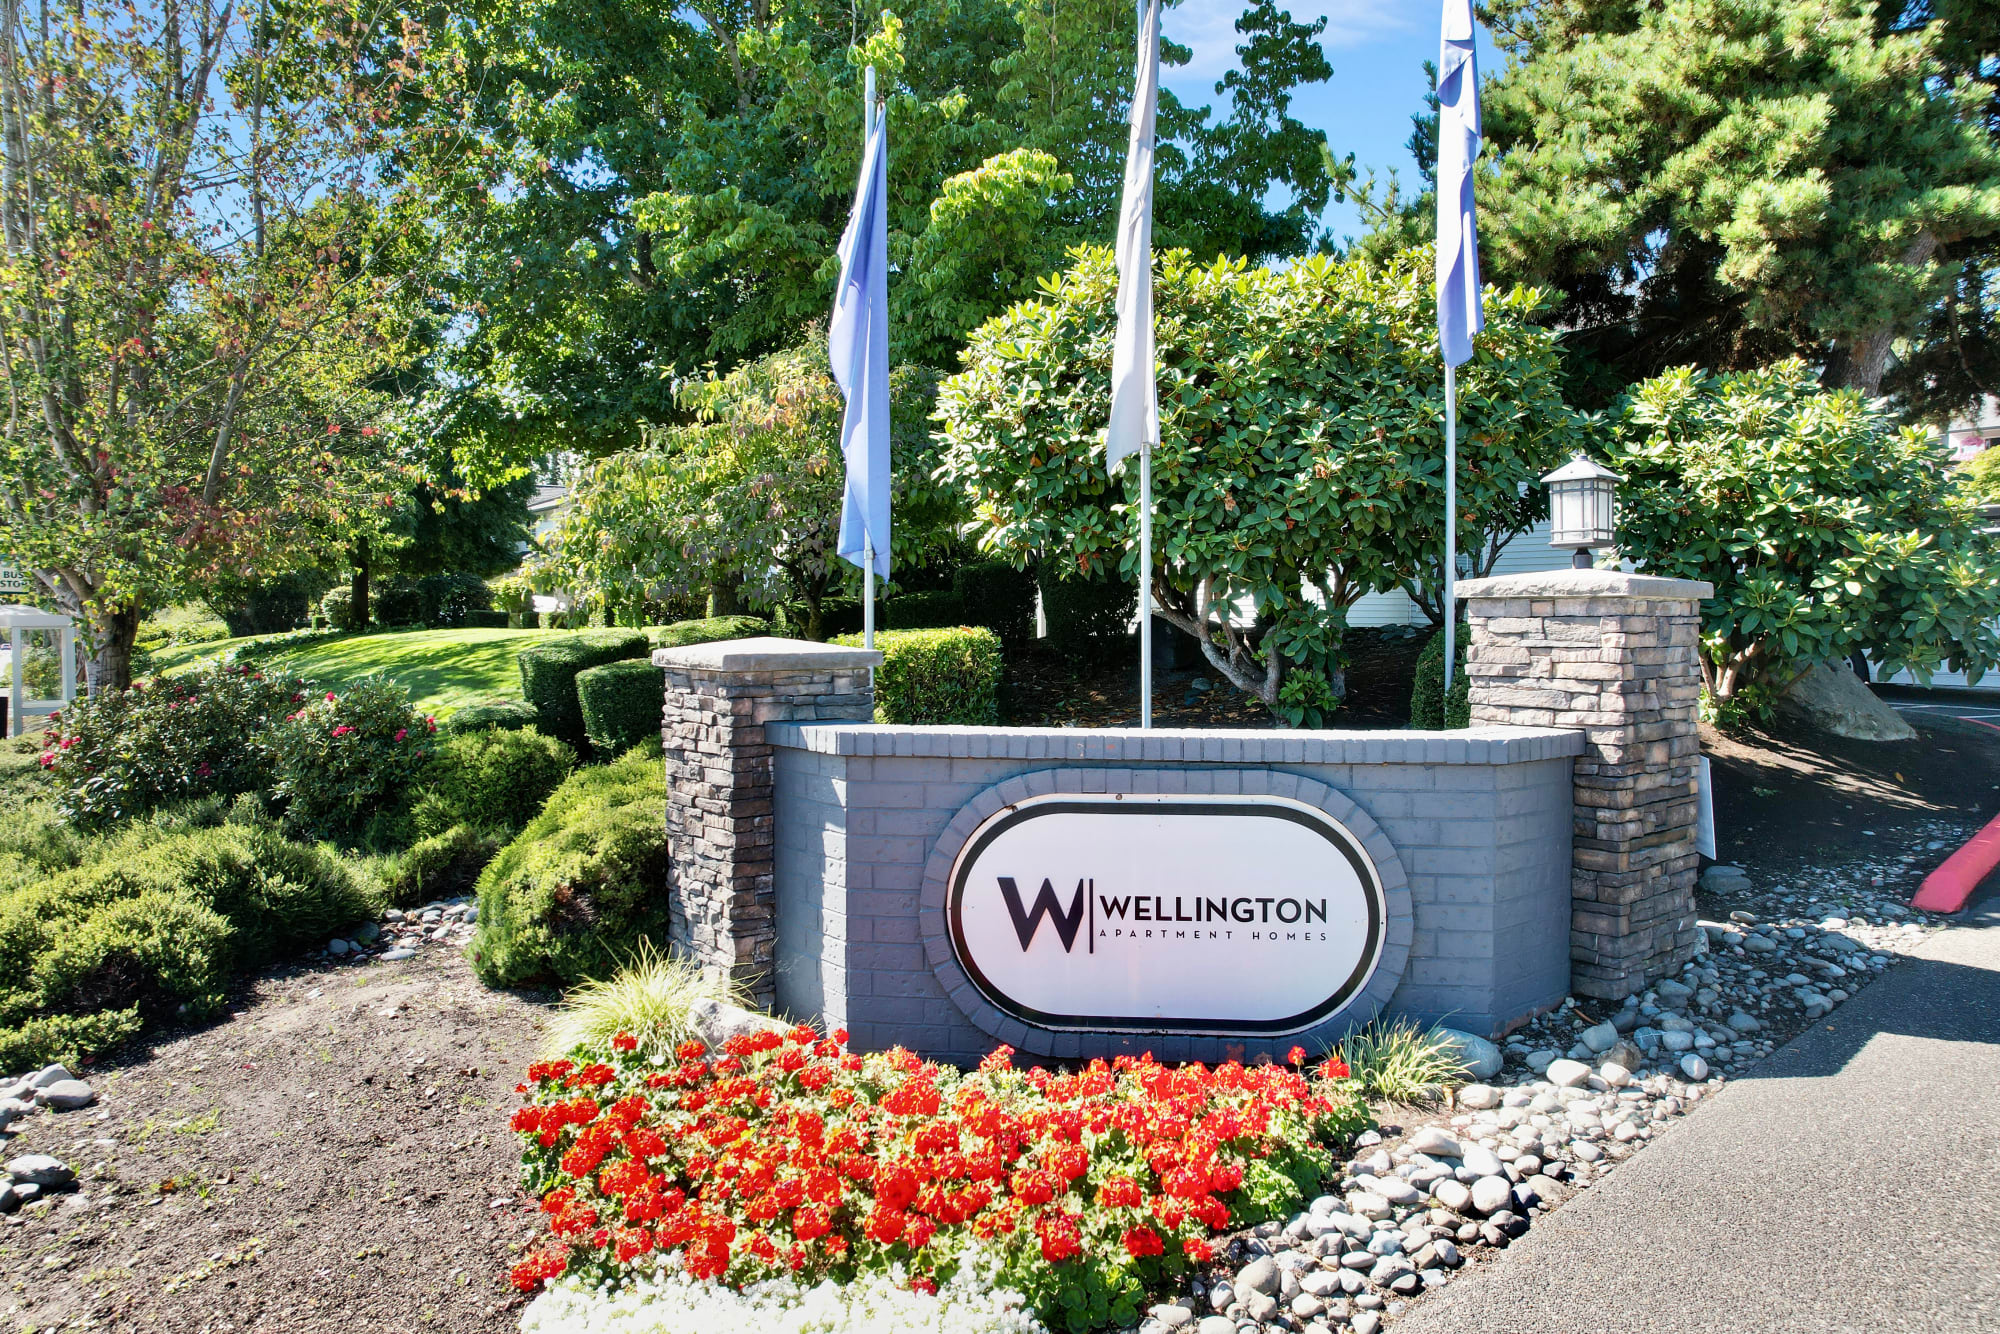 The front monument sign at Wellington Apartment Homes in Silverdale, Washington